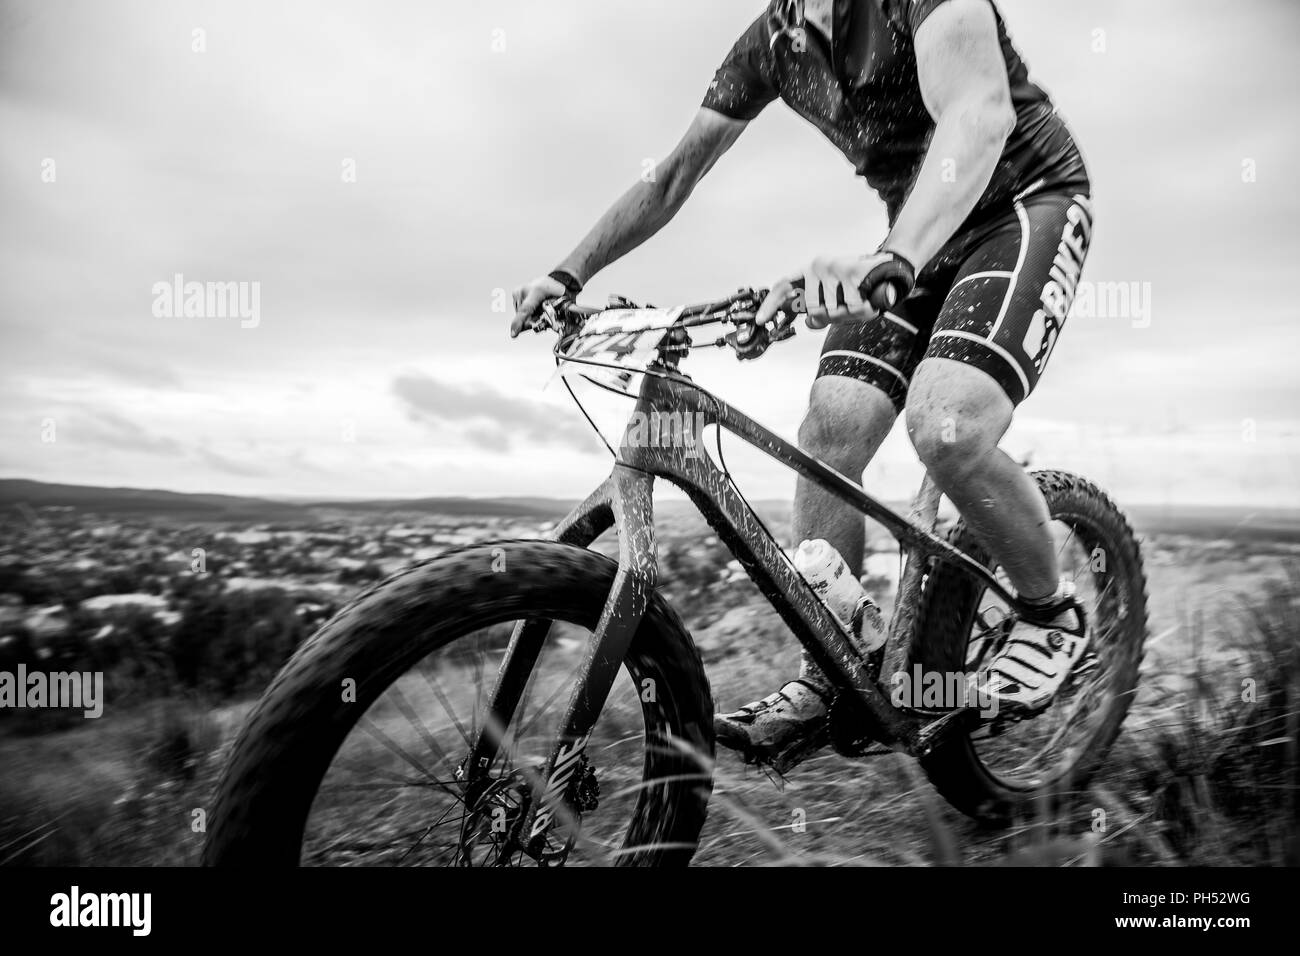 V.Ufaley, Russia - August 12, 2018: racer cyclist mountain biker in mud spray during race XCM Big stone Stock Photo